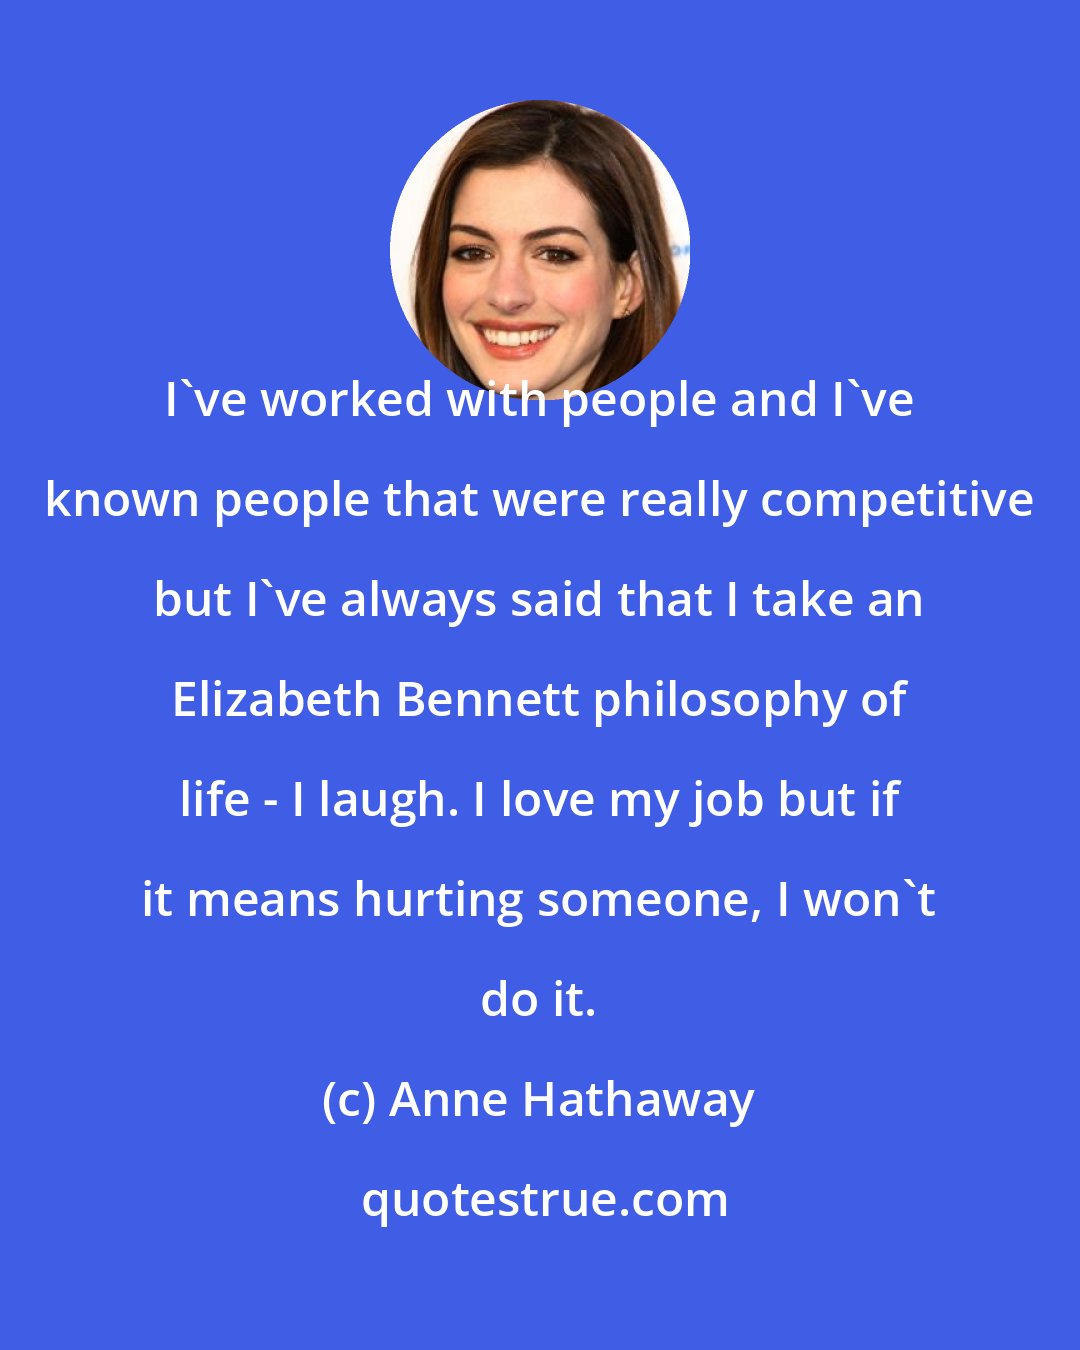 Anne Hathaway: I've worked with people and I've known people that were really competitive but I've always said that I take an Elizabeth Bennett philosophy of life - I laugh. I love my job but if it means hurting someone, I won't do it.